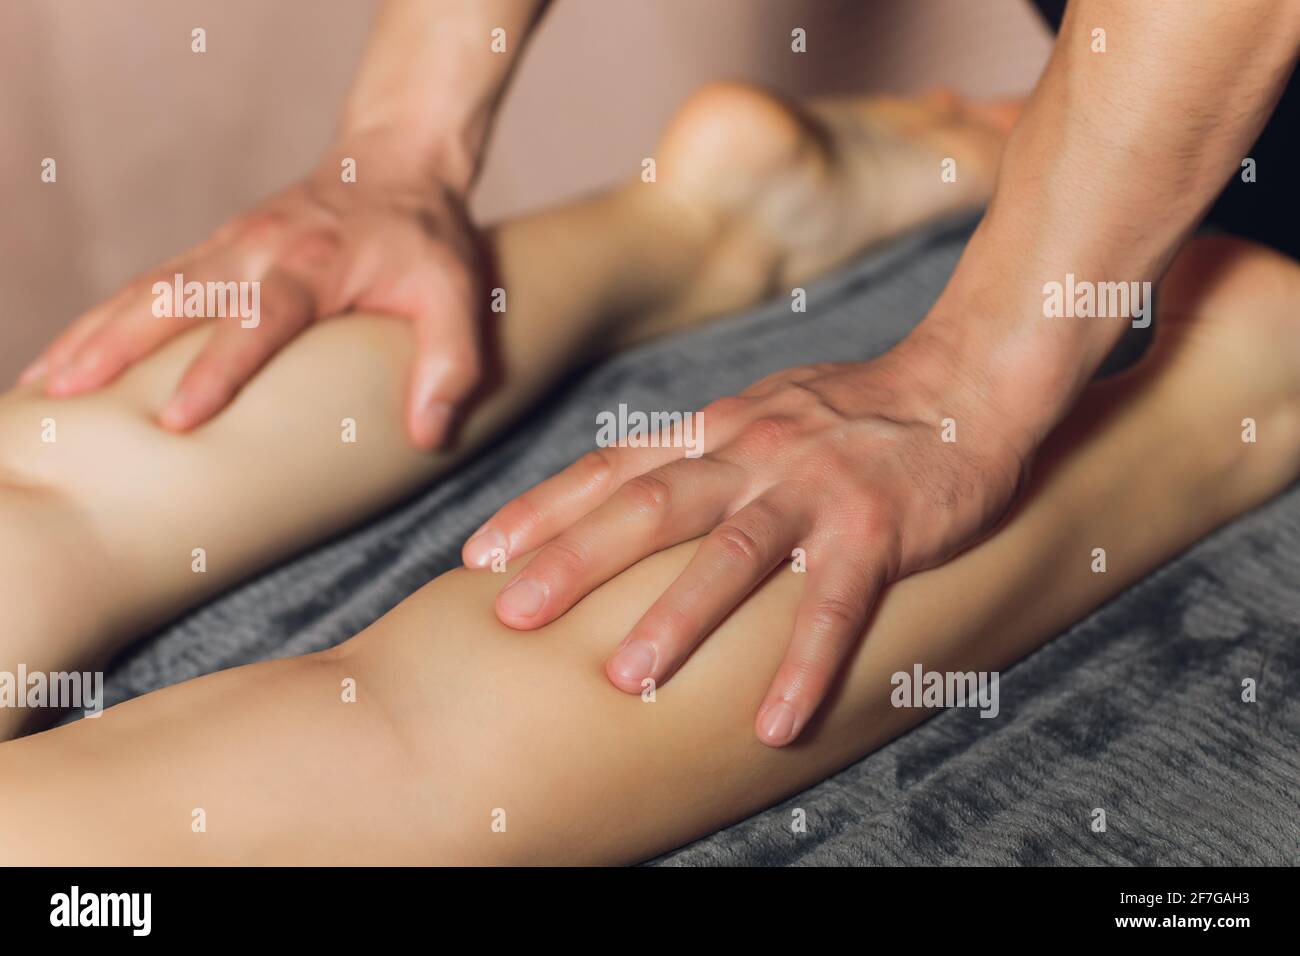 A foot massage being carried out in a spa by a masseuse Stock Photo